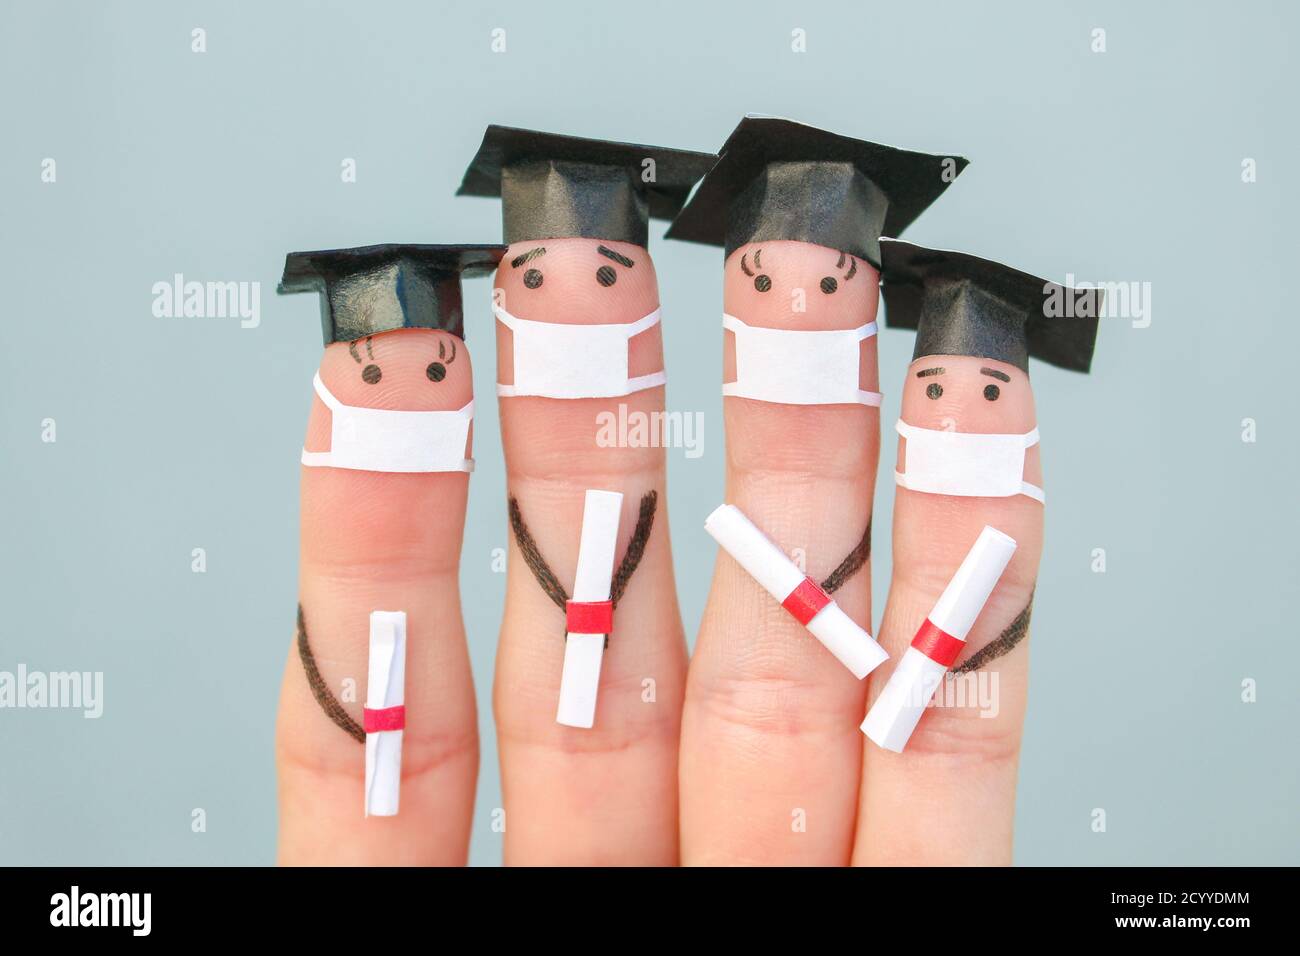 Fingers art of students in medical mask from COVID-2019. Graduates holding their diploma after graduation. Stock Photo